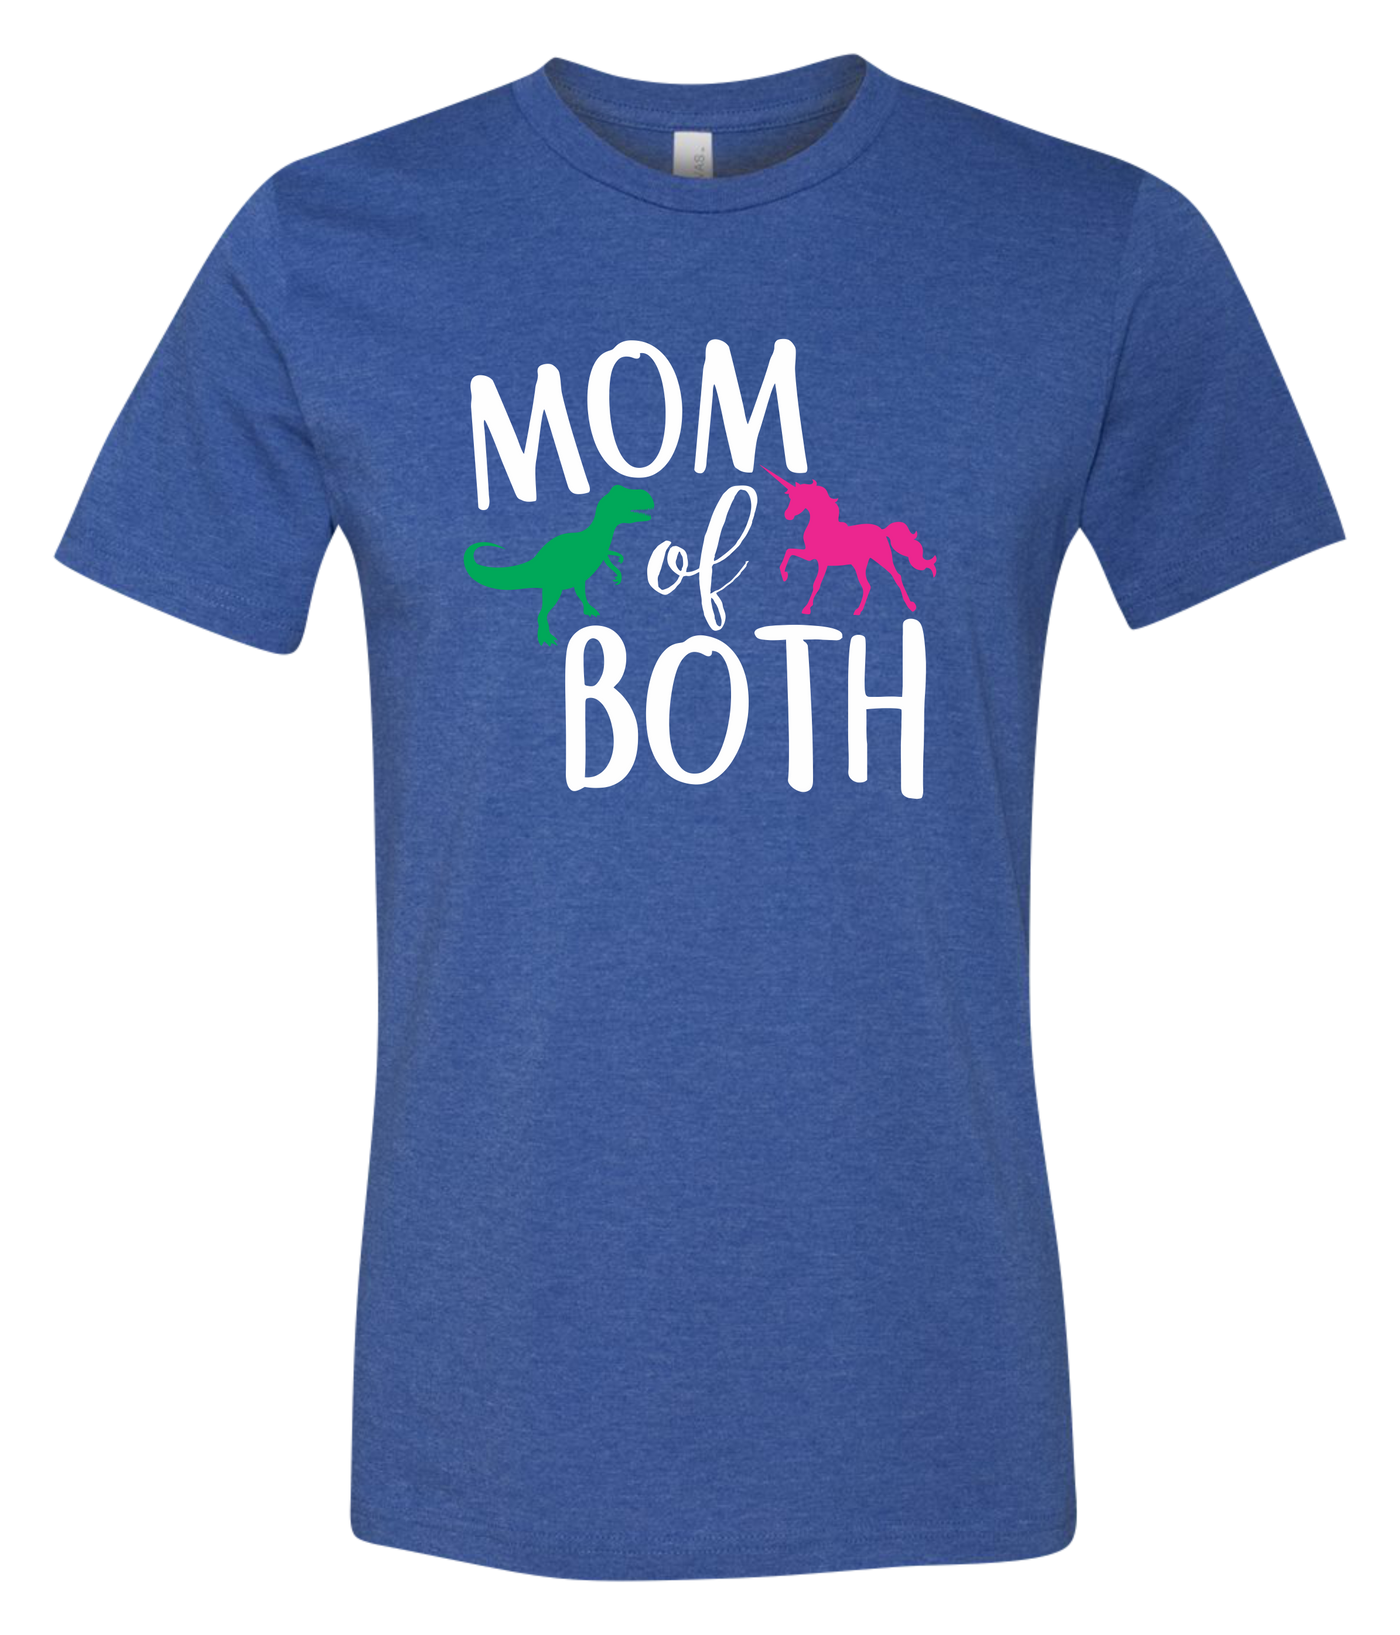 Mom of Both Short Sleeve Graphic T-shirt